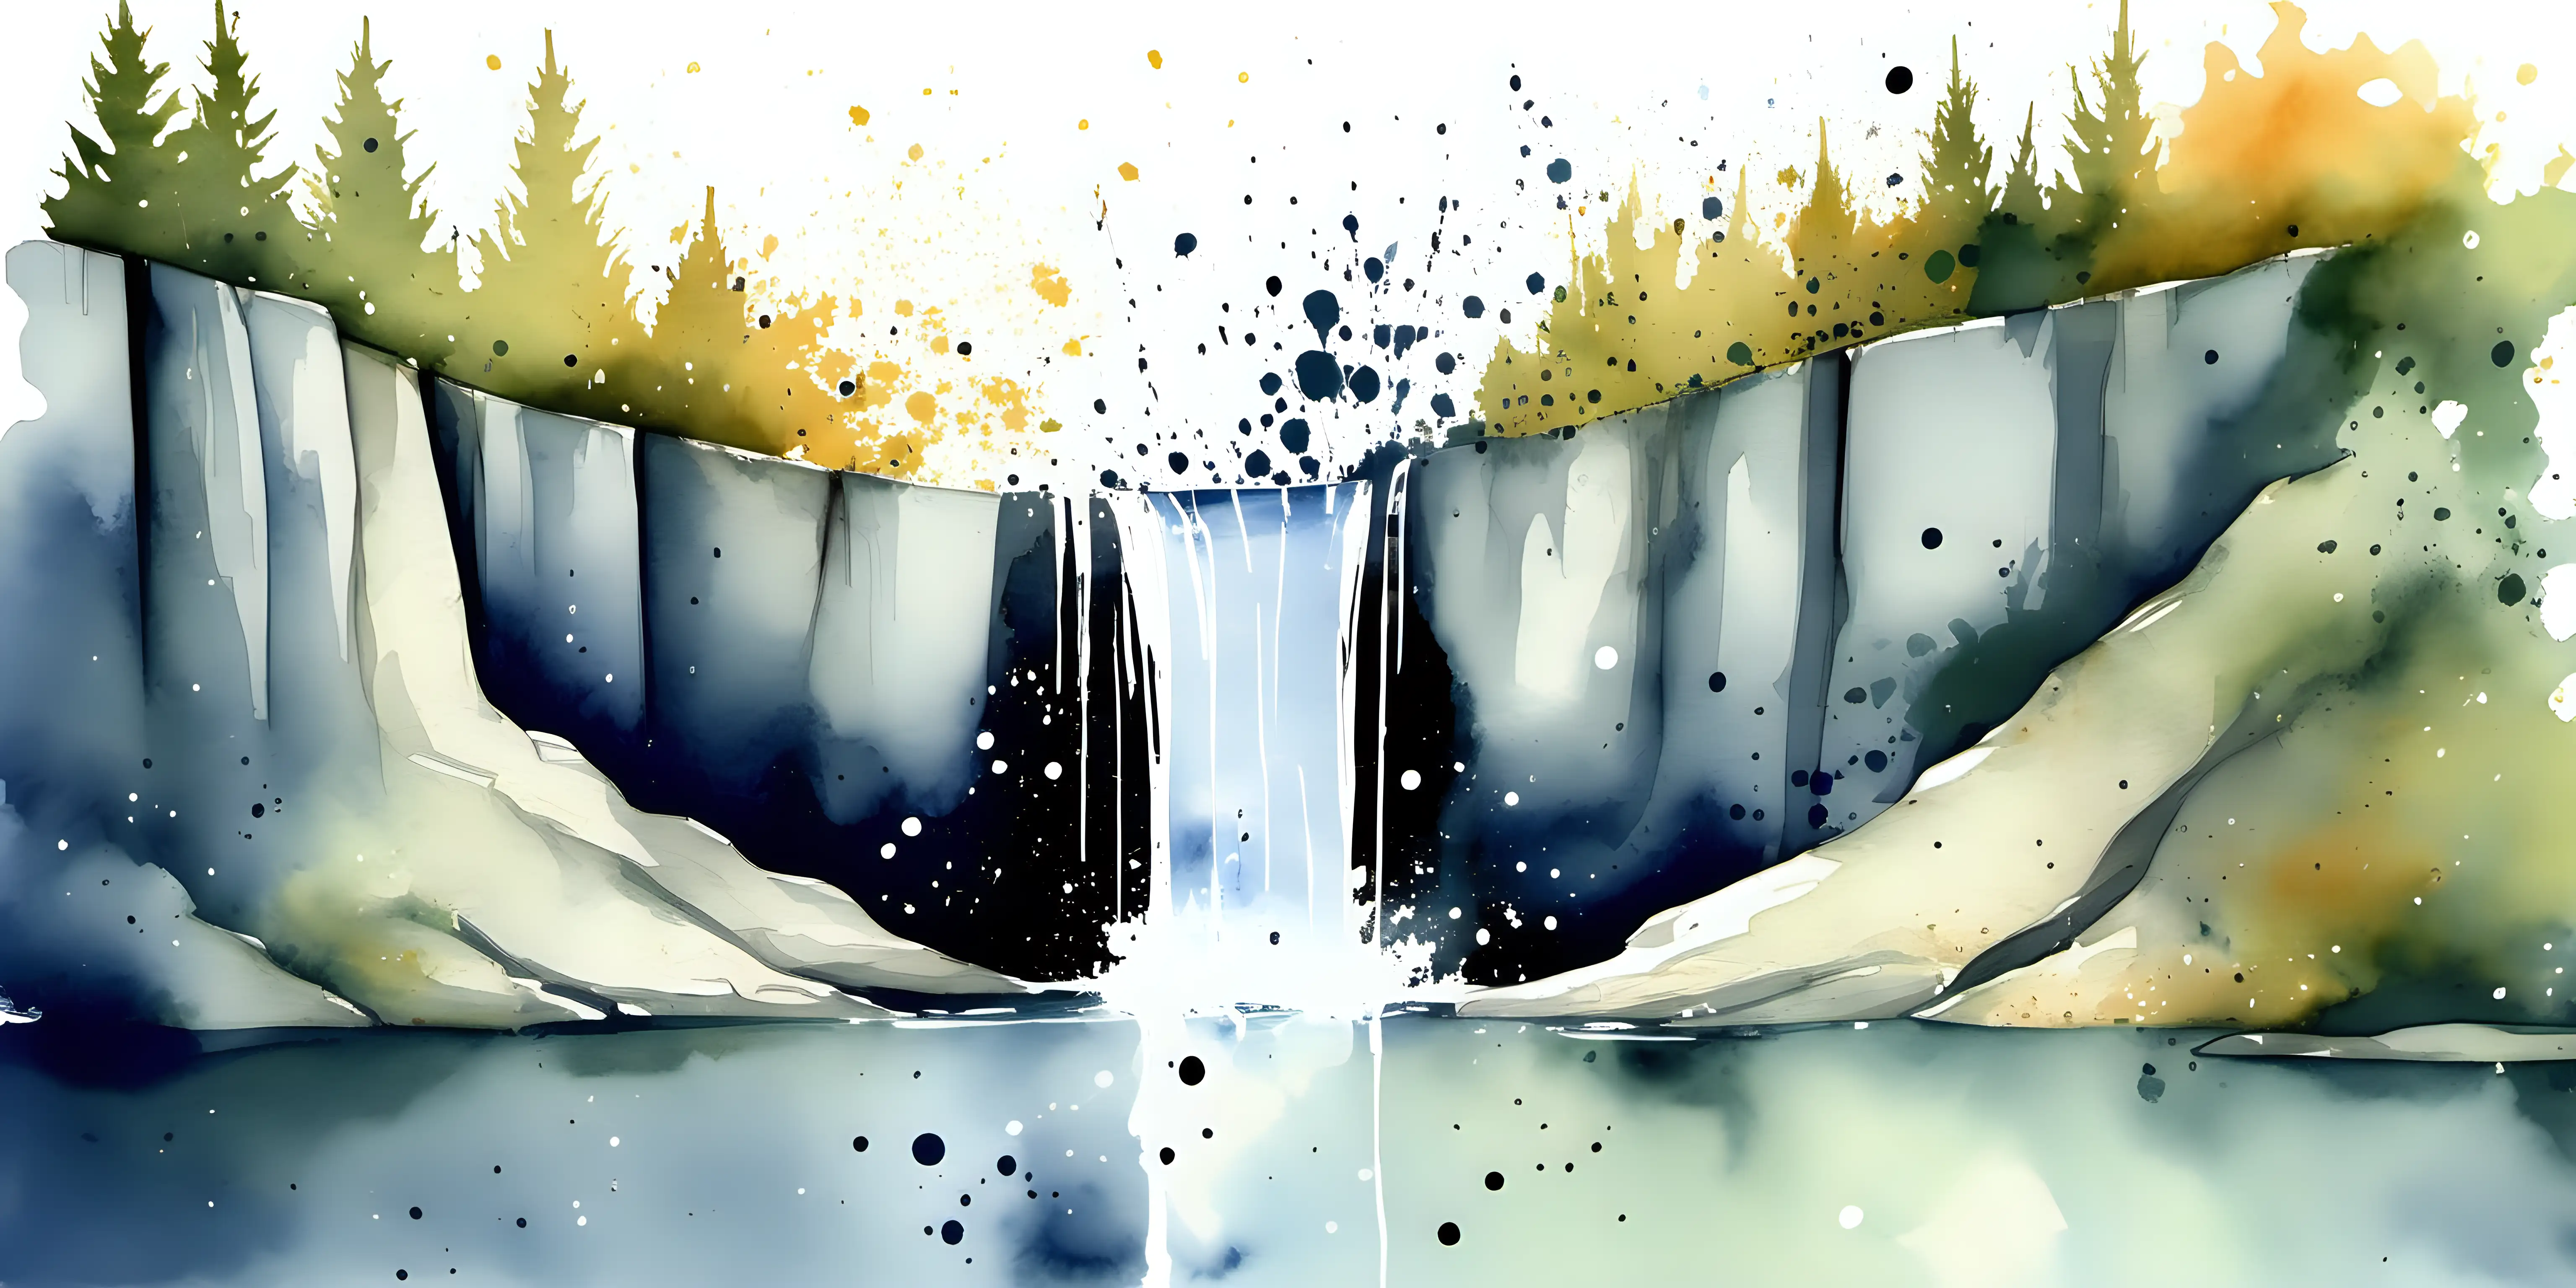 Tranquil Watercolor Landscape with Minimalistic Waterfall